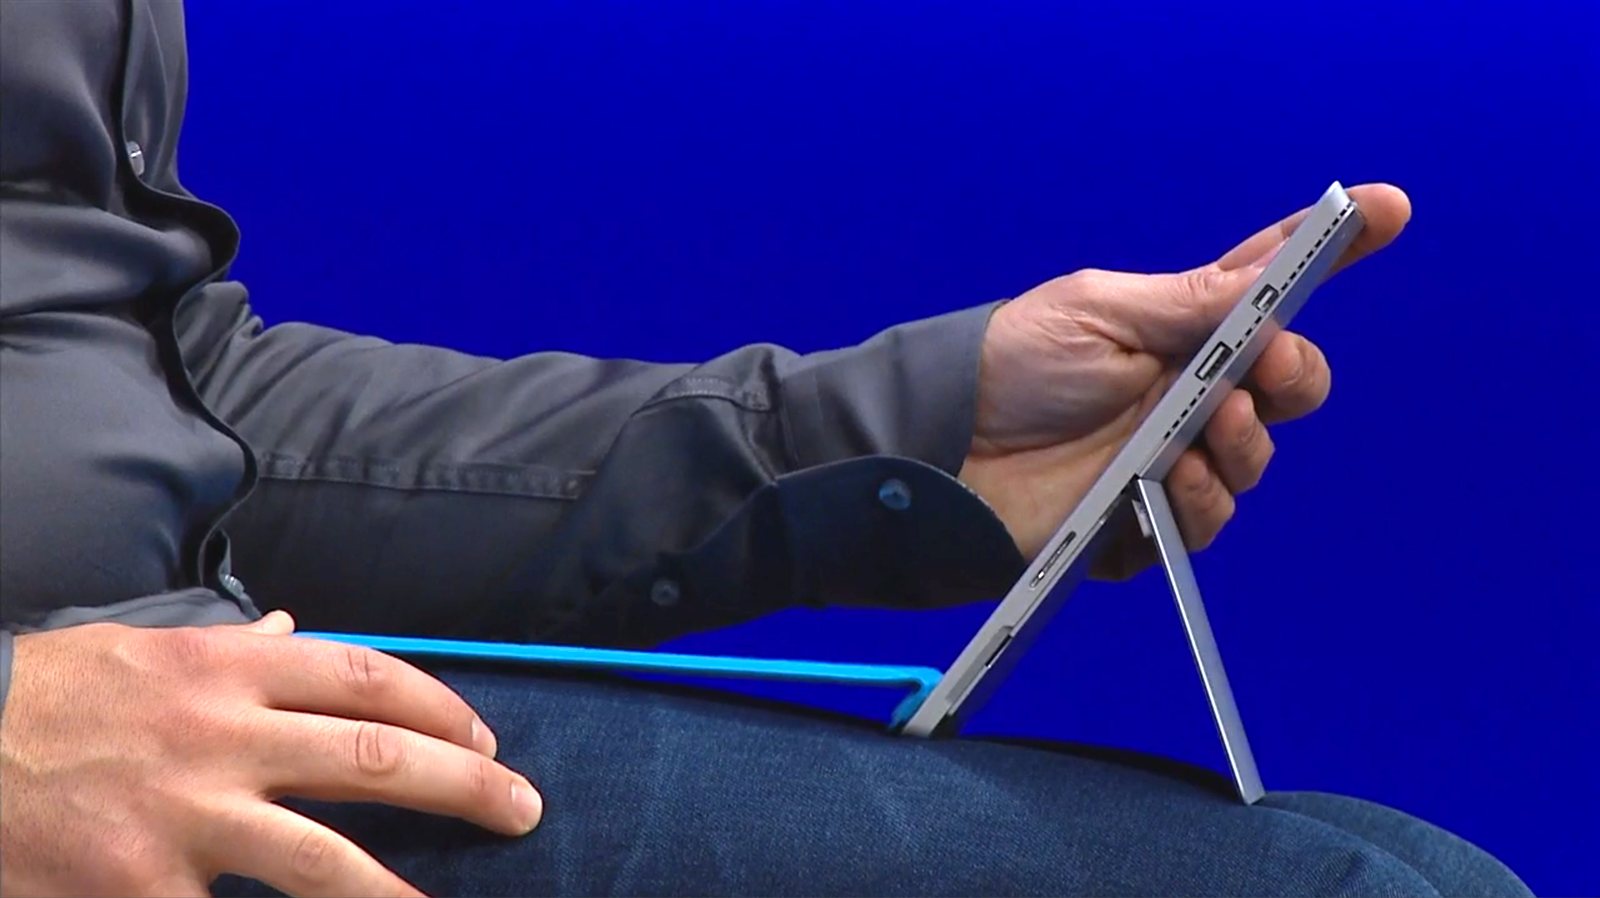 Panos Panay clicks the keyboard cover onto the front of the Surface Pro 3 to increase stability.